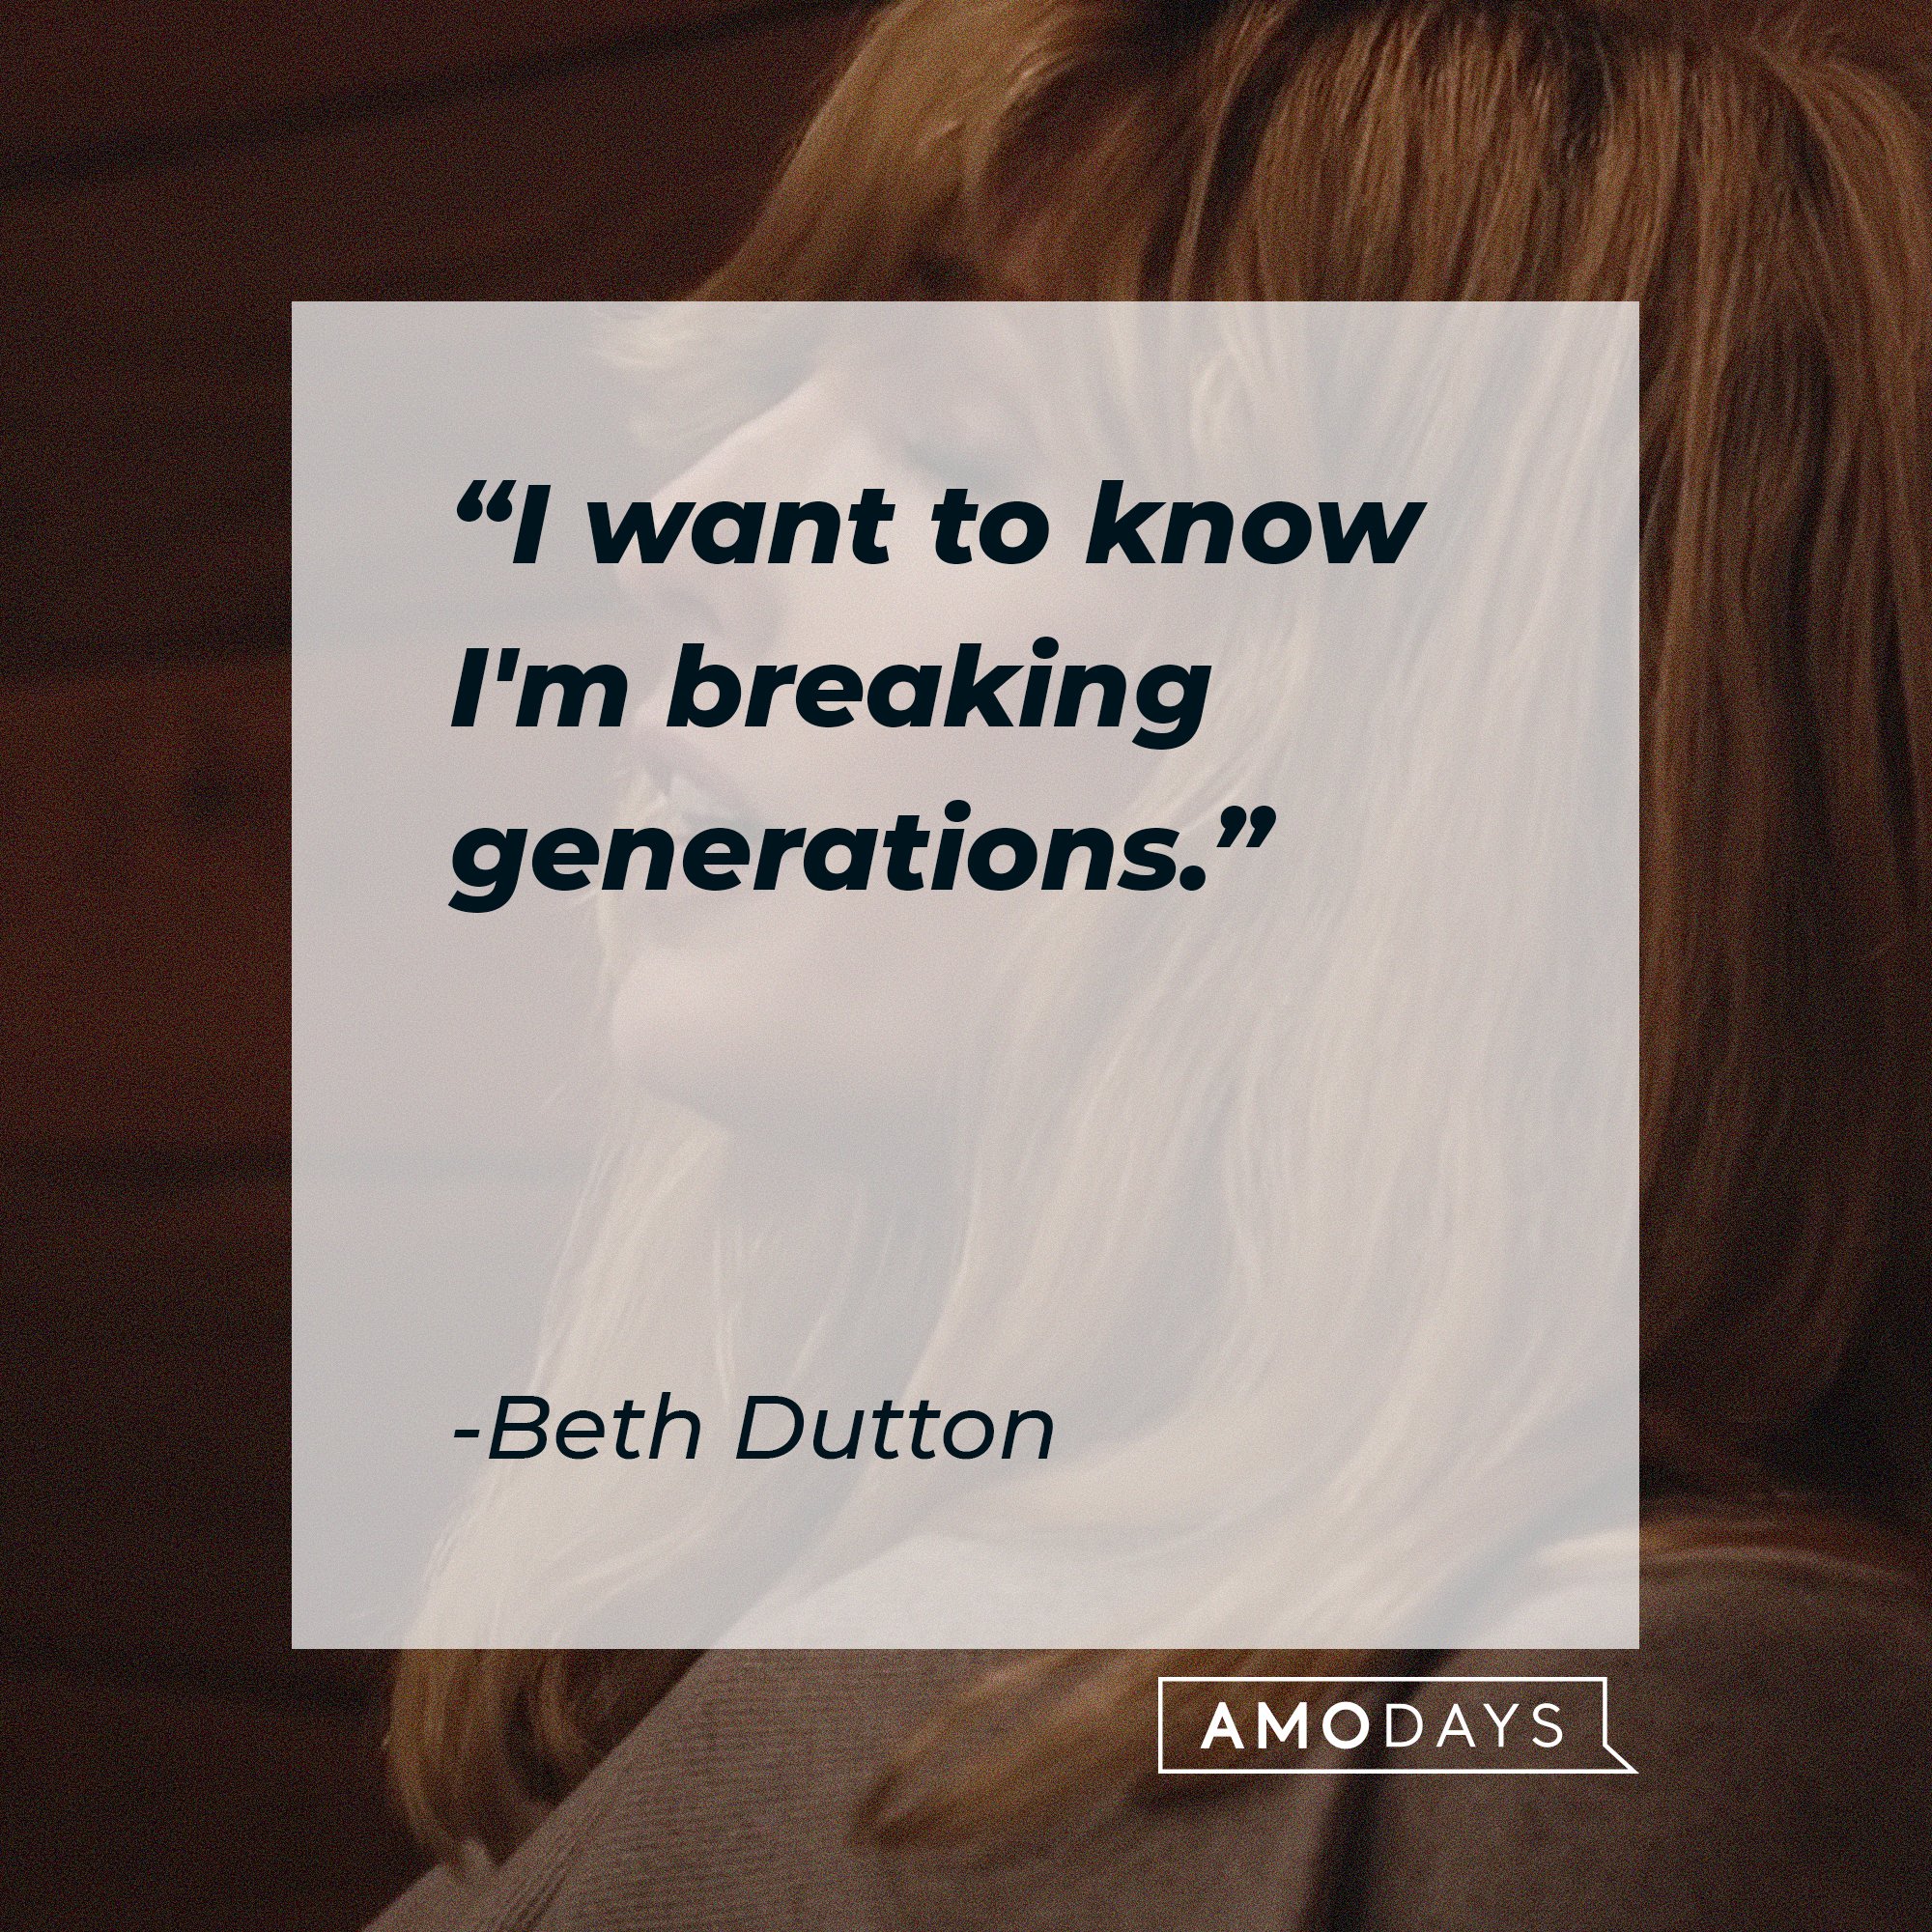 Beth Dutton's quote: "I want to know I'm breaking generations." | Source: AmoDays